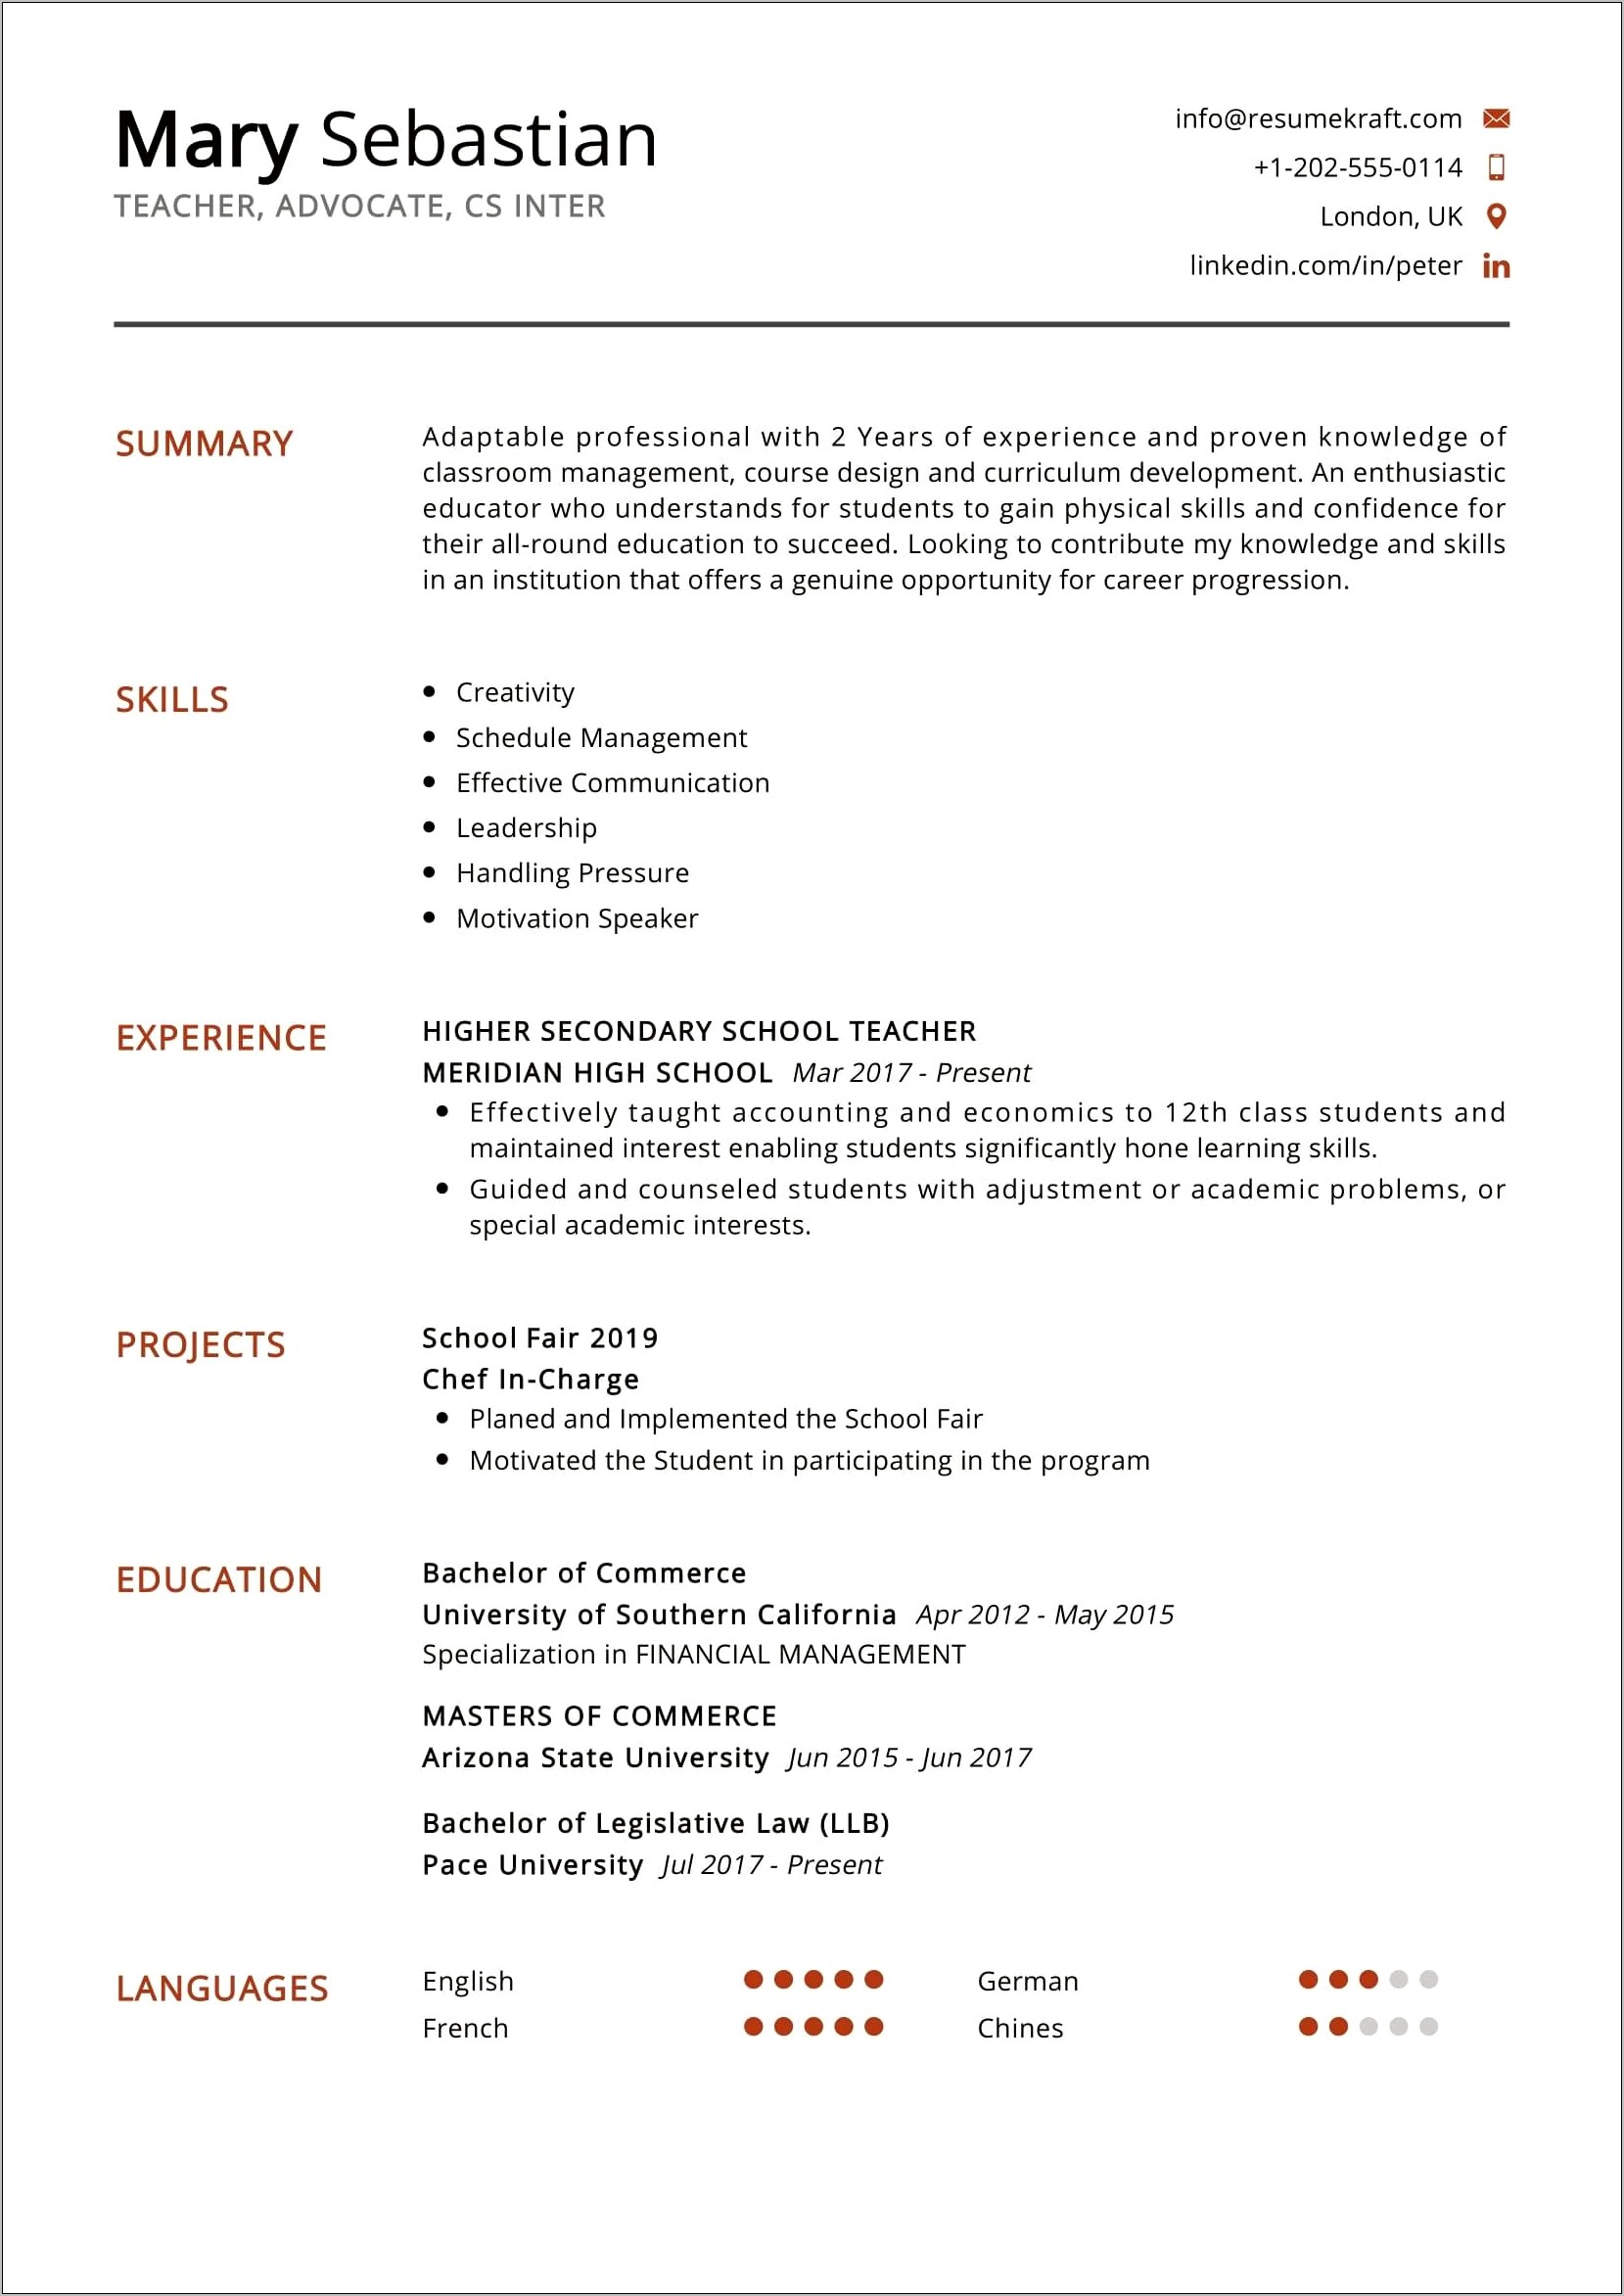 Resume Curriculum For High School Students